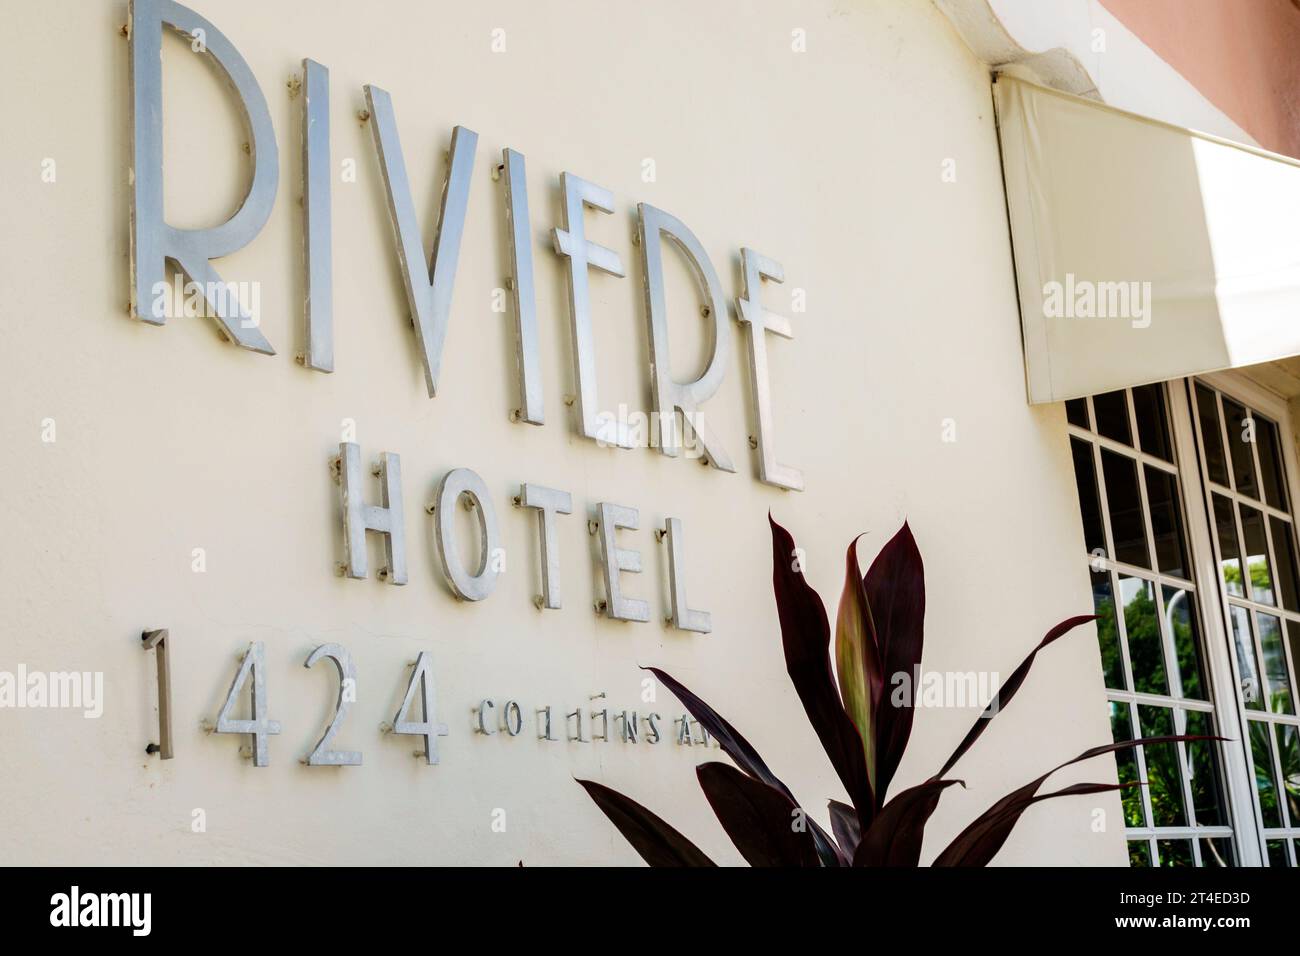 Miami Beach Florida,outside exterior,building front entrance hotel,Collins Avenue,Riviere South Beach Hotel sign,hotels motels businesses Stock Photo